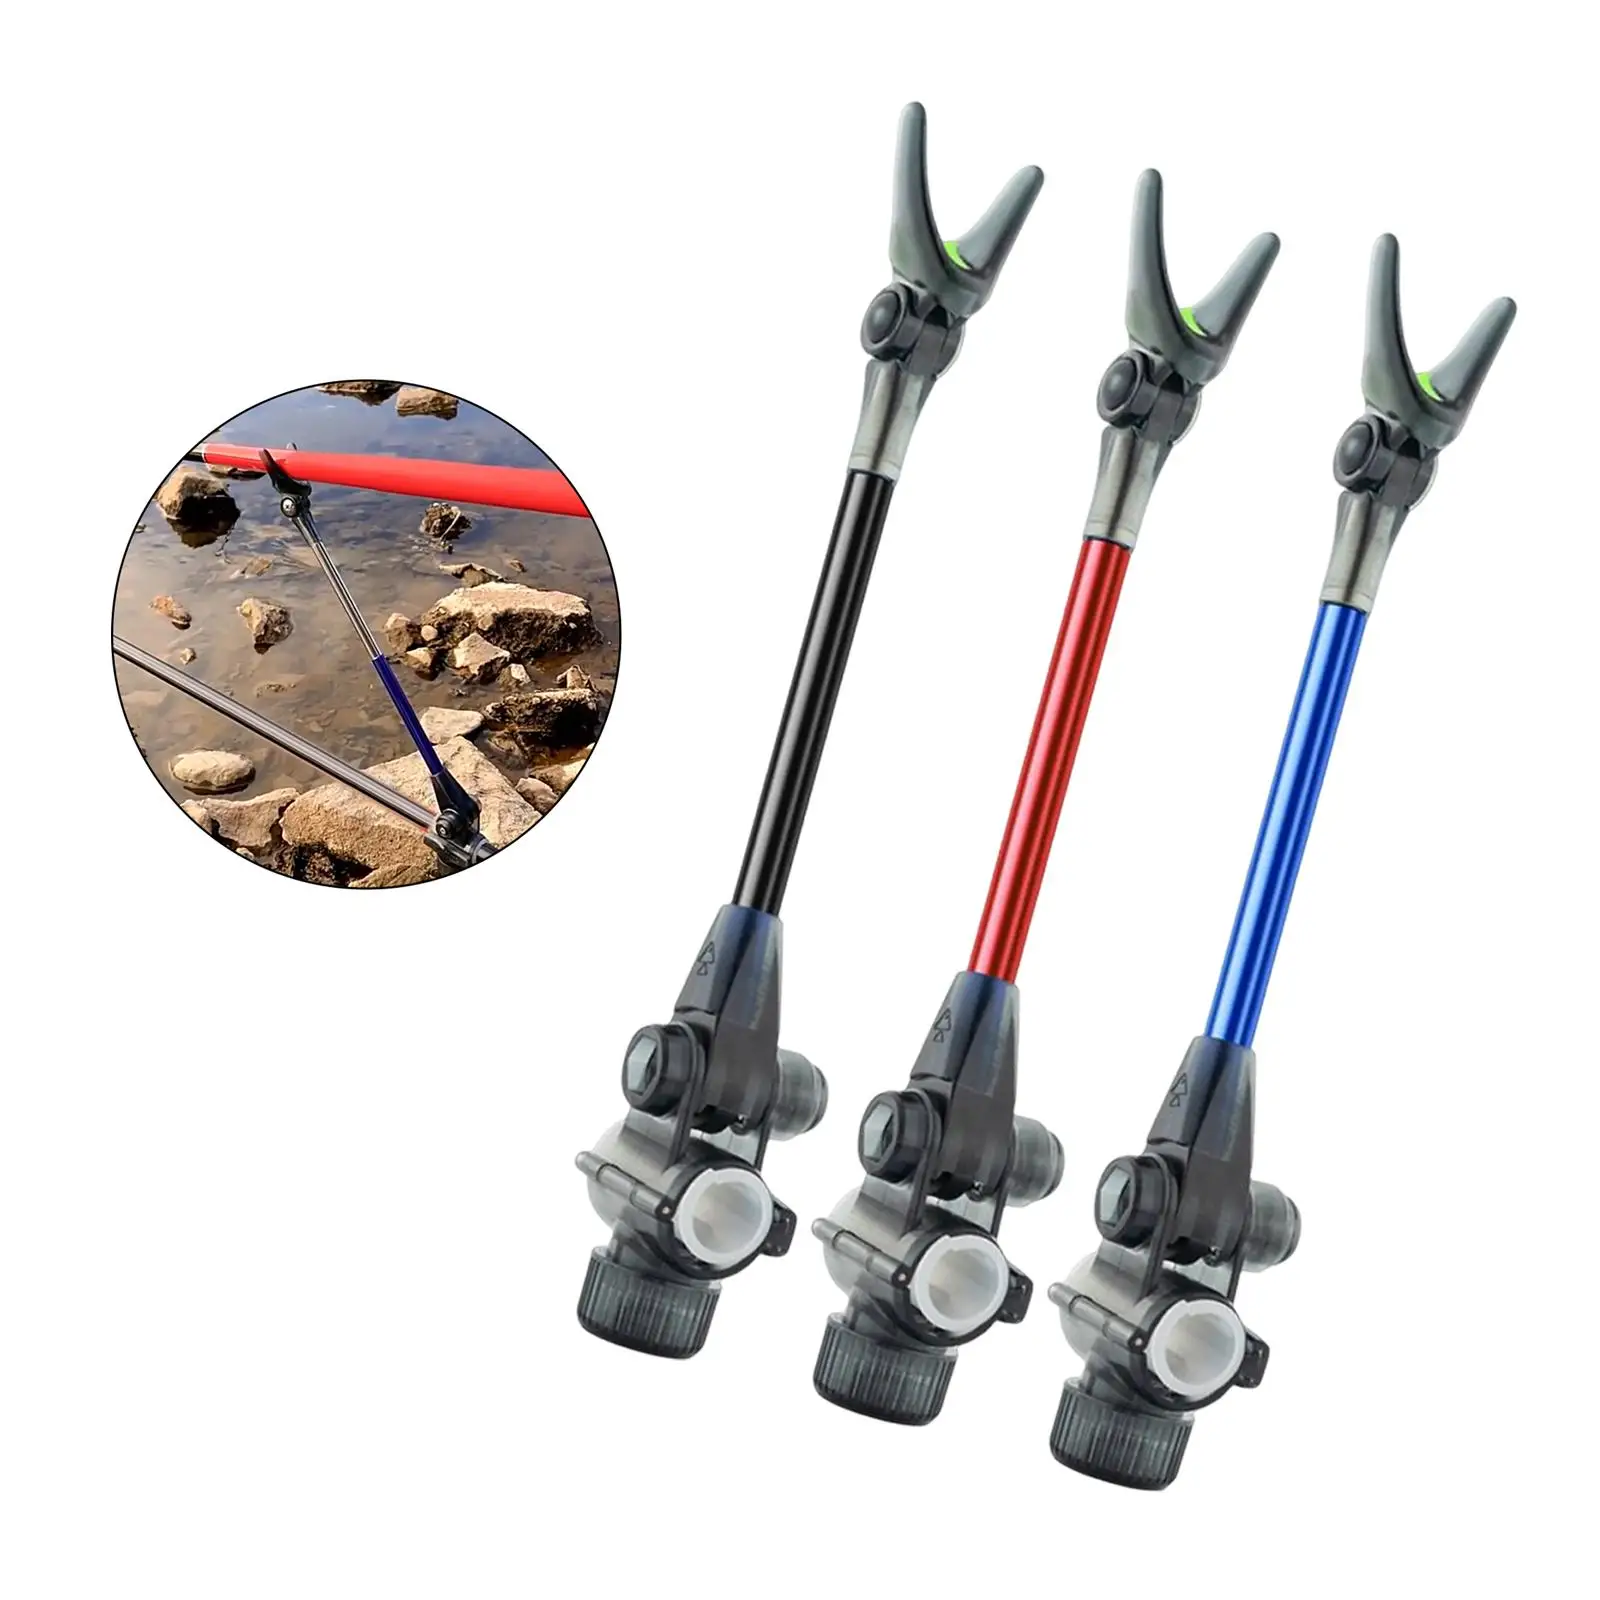 Telescopic Rod Holders for Bank Fishing Fishing Rod Bracket Rack Anti Off Stand Nonslip Support Fish Rod Holder Fishing Tackle